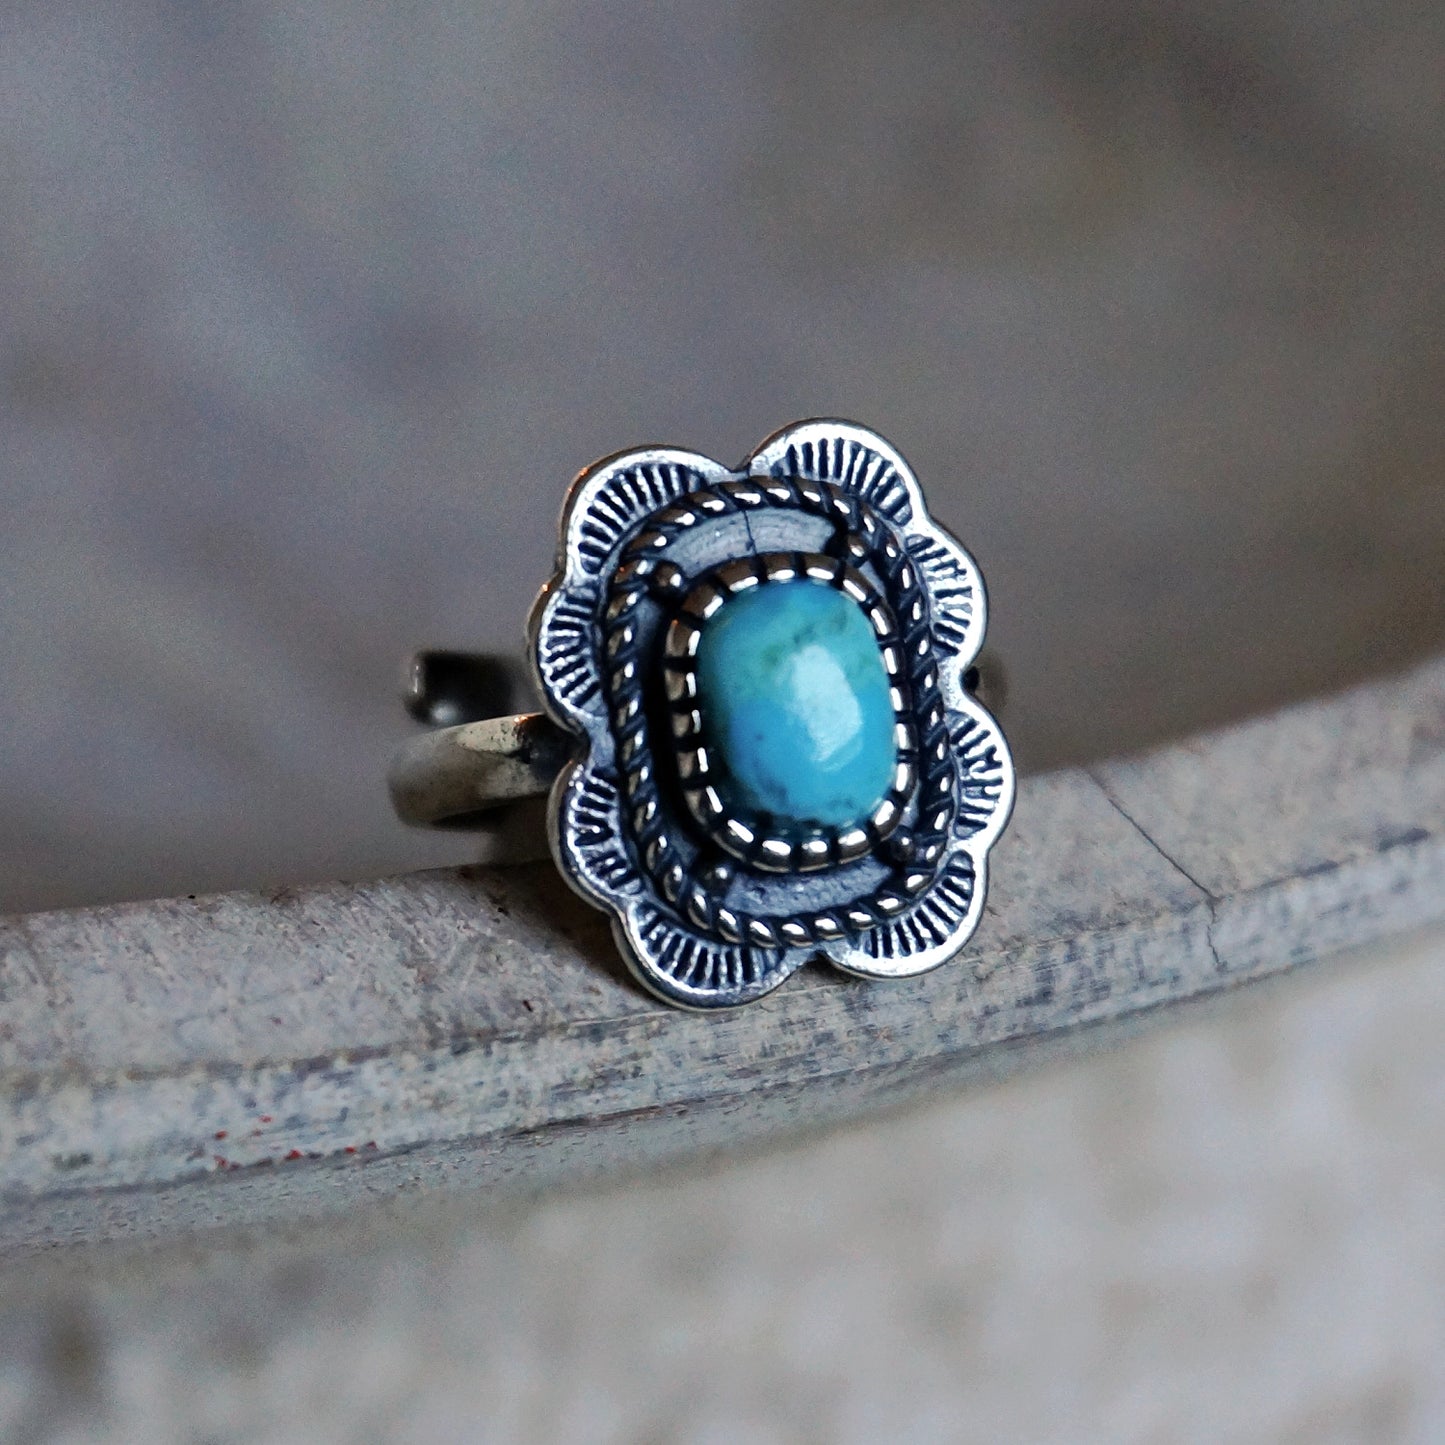 Asia Turquoise Solitaire Ring Solid 925 Sterling Silver - Moon Room Shop and Wellness